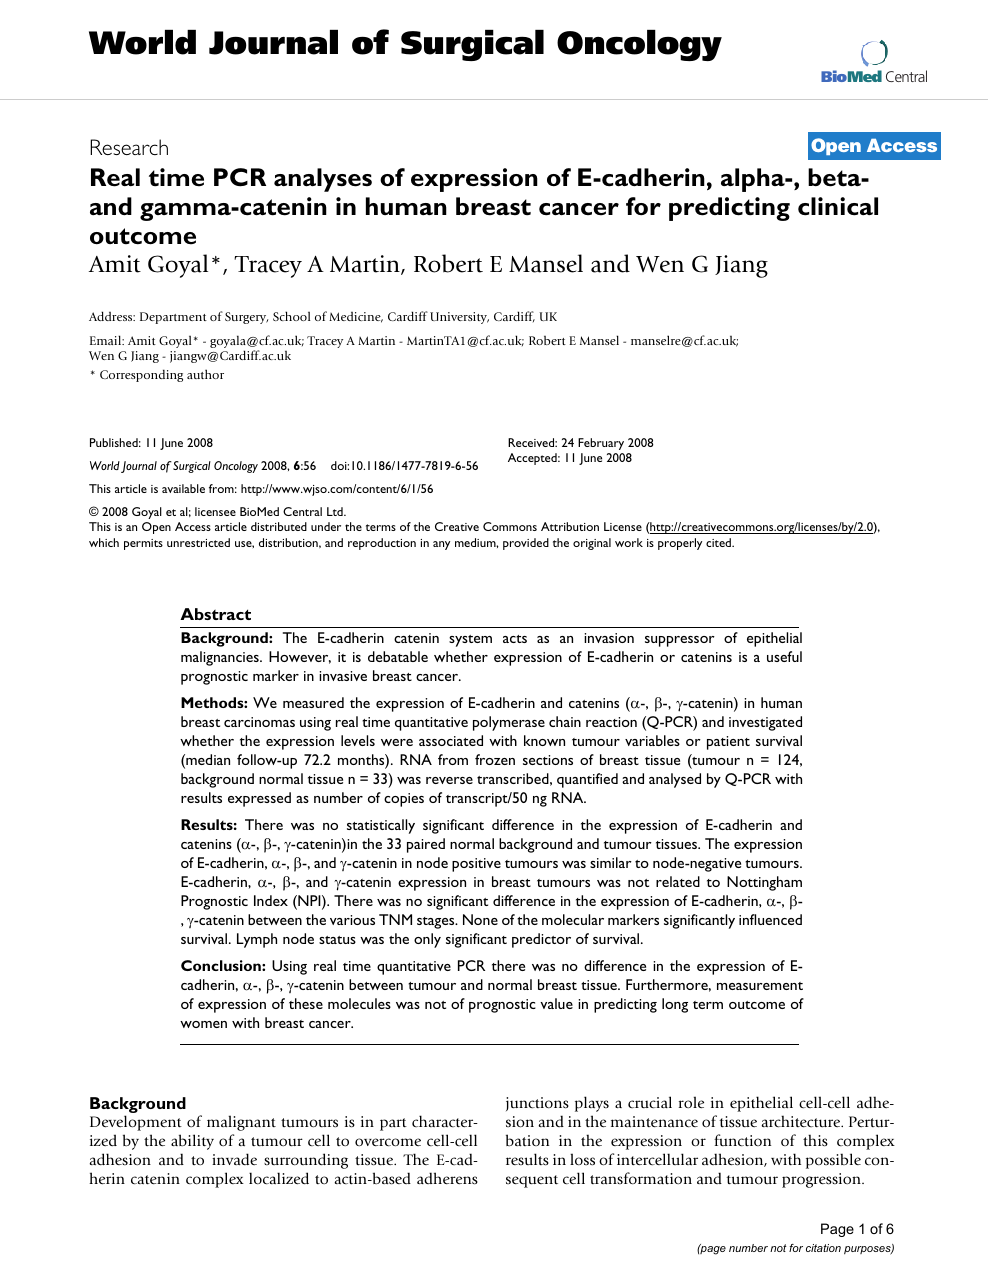 Real Time Pcr Analyses Of Expression Of E Cadherin Alpha Beta And Gamma Catenin In Human Breast Cancer For Predicting Clinical Outcome Topic Of Research Paper In Clinical Medicine Download Scholarly Article Pdf